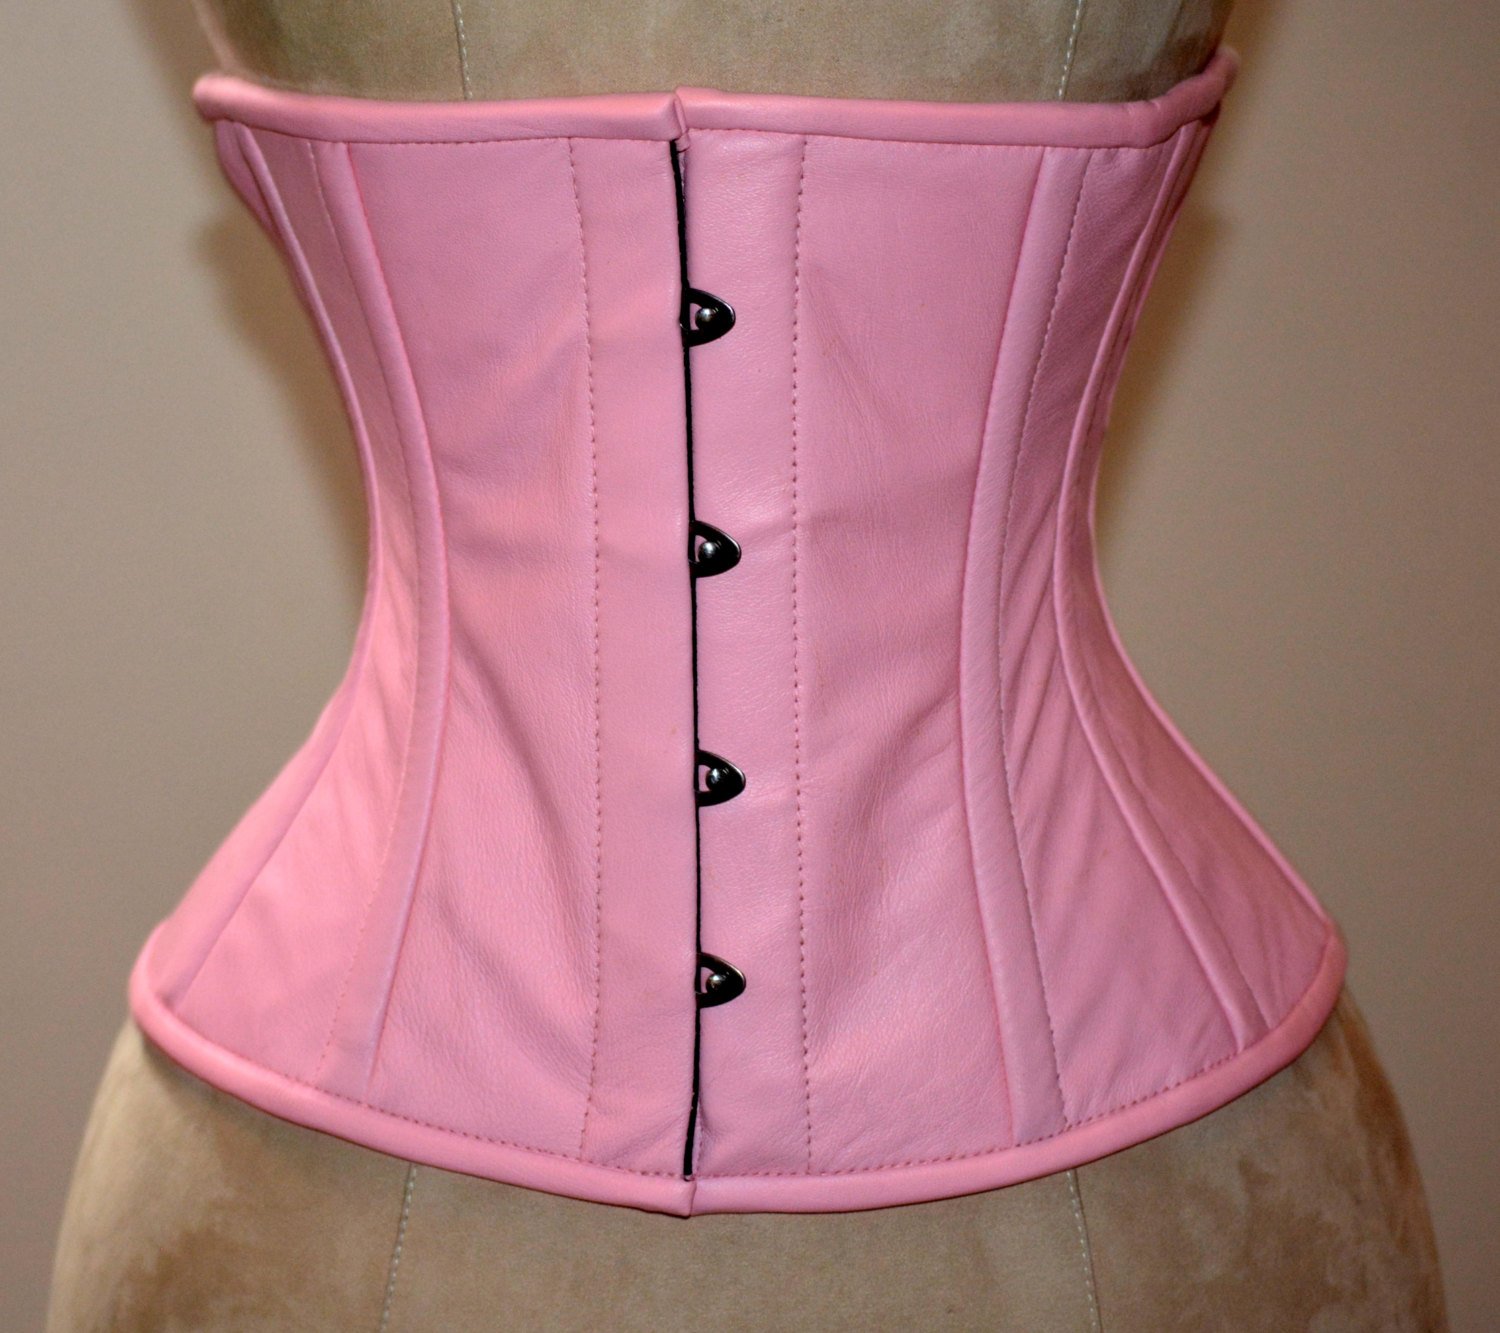 Lambskin waist steel-boned authentic corset of the pale pink color. Corset  for tight lacing and waist training, steampunk, gothic